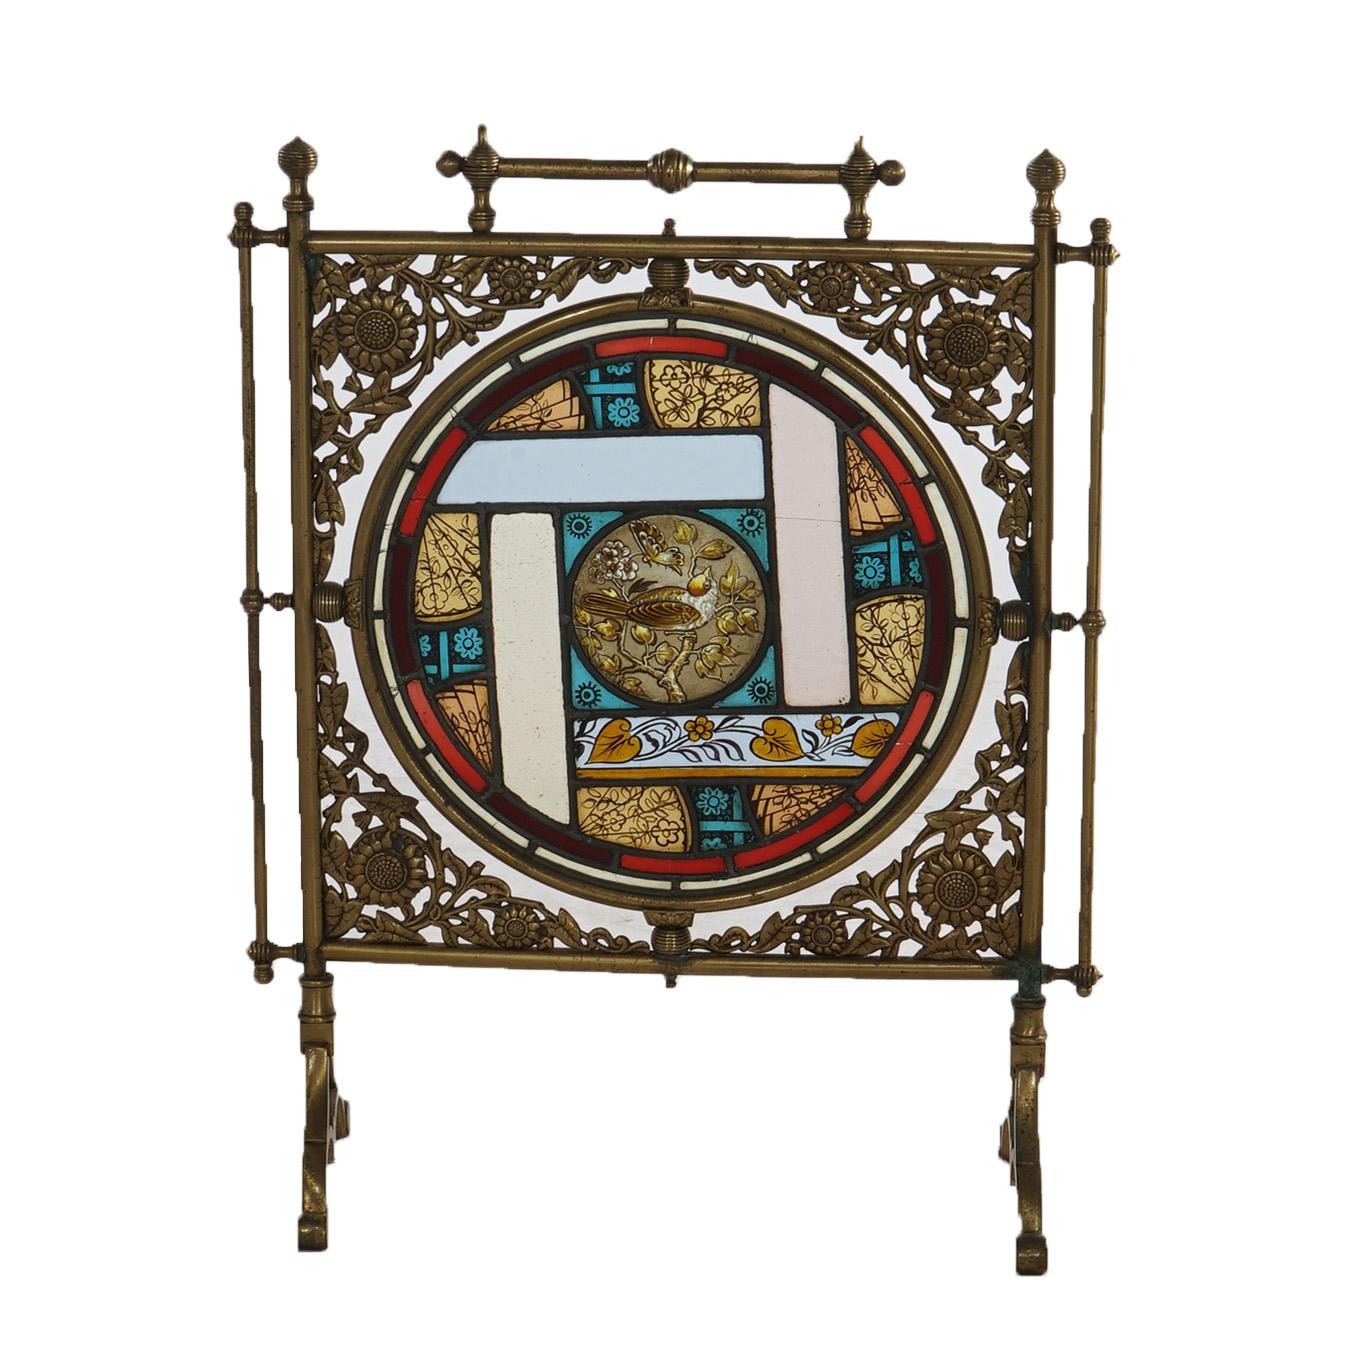 Antique Aesthetic Bradley & Hubbard Fireplace Screen, Foliate Cast Brass & Central Stained Glass Medallion, c1870

Measures- 27''H x 21.5''W x 7''D